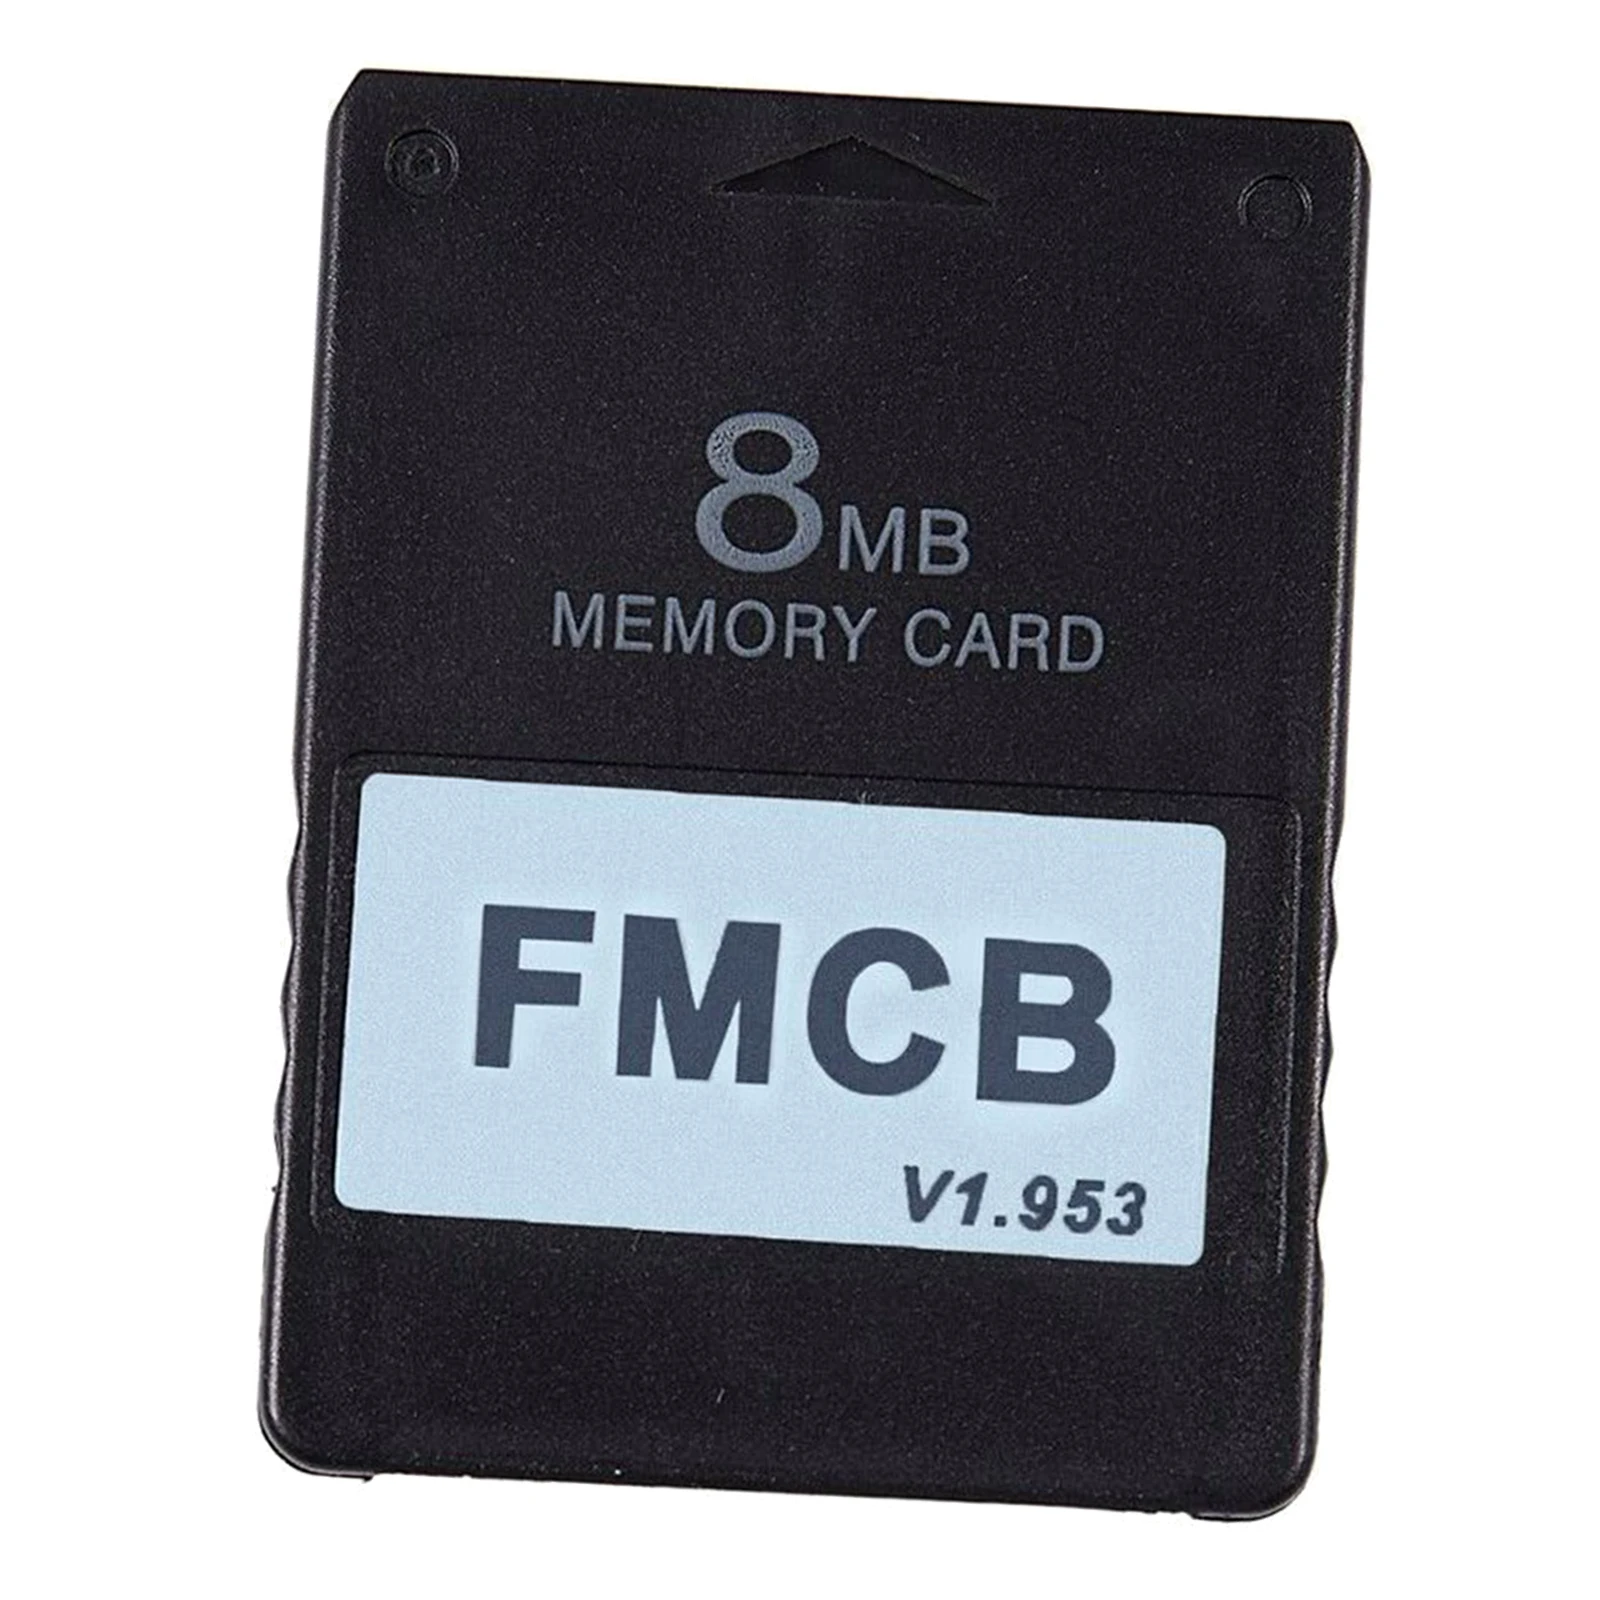 Free McBoot FMCB v1.953 Memory Card for Sony PS2 Replacement